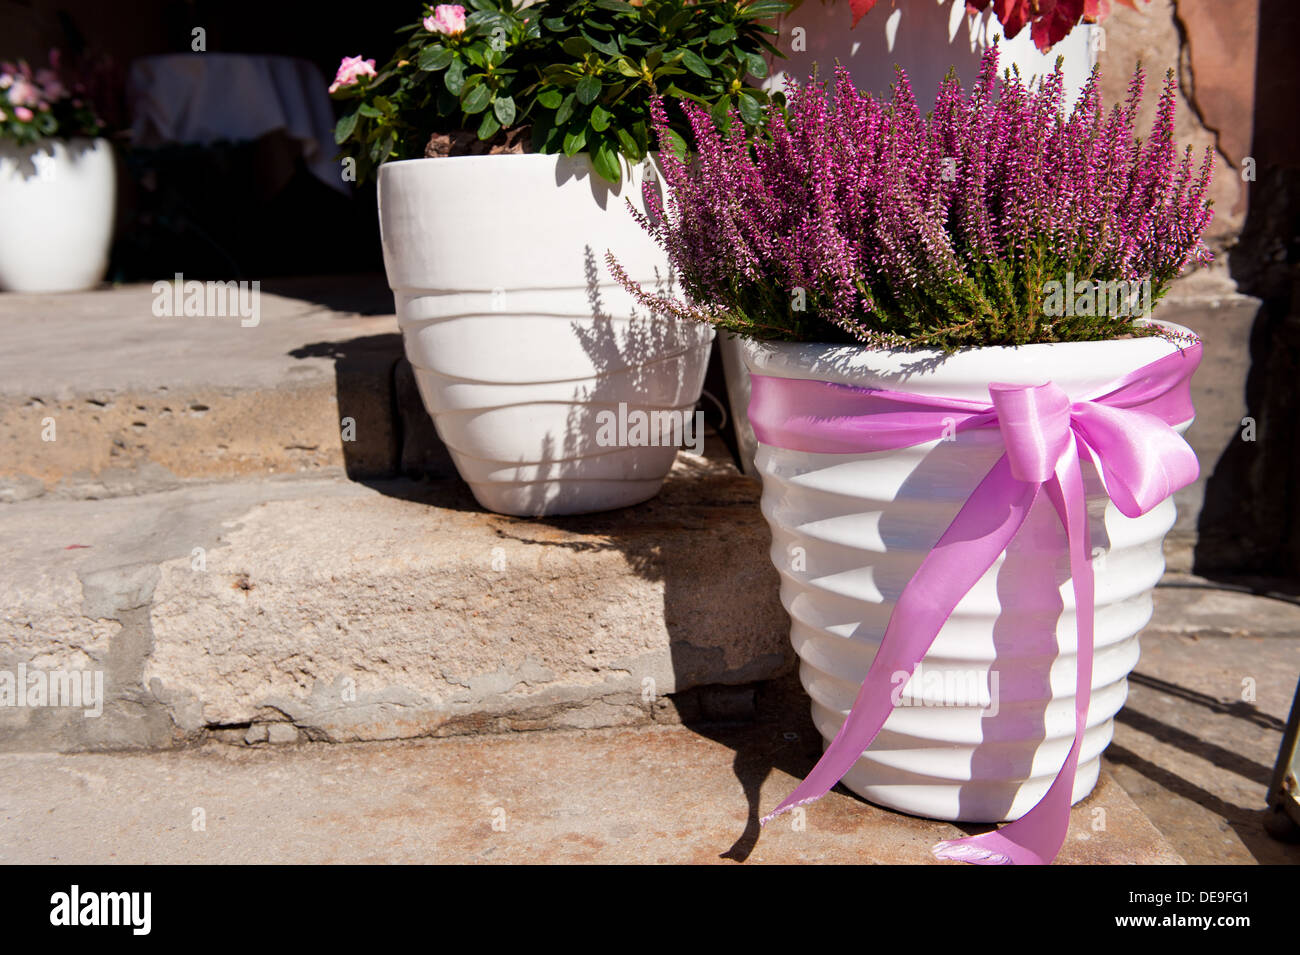 heather or ling plant in white big flowerpot Stock Photo